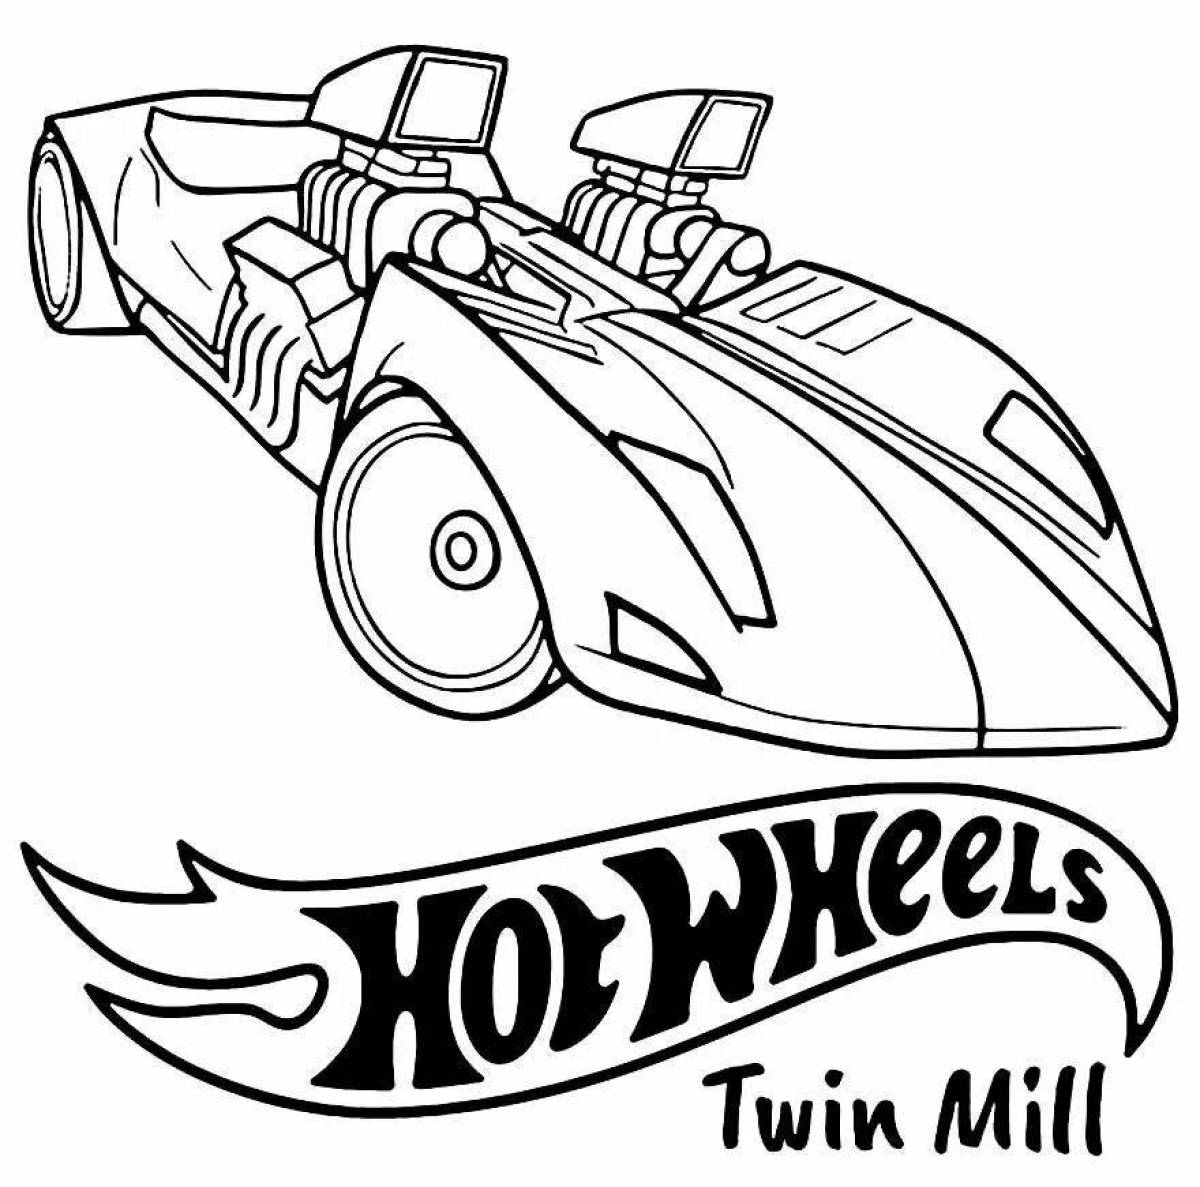 Glowing hot wheels coloring book